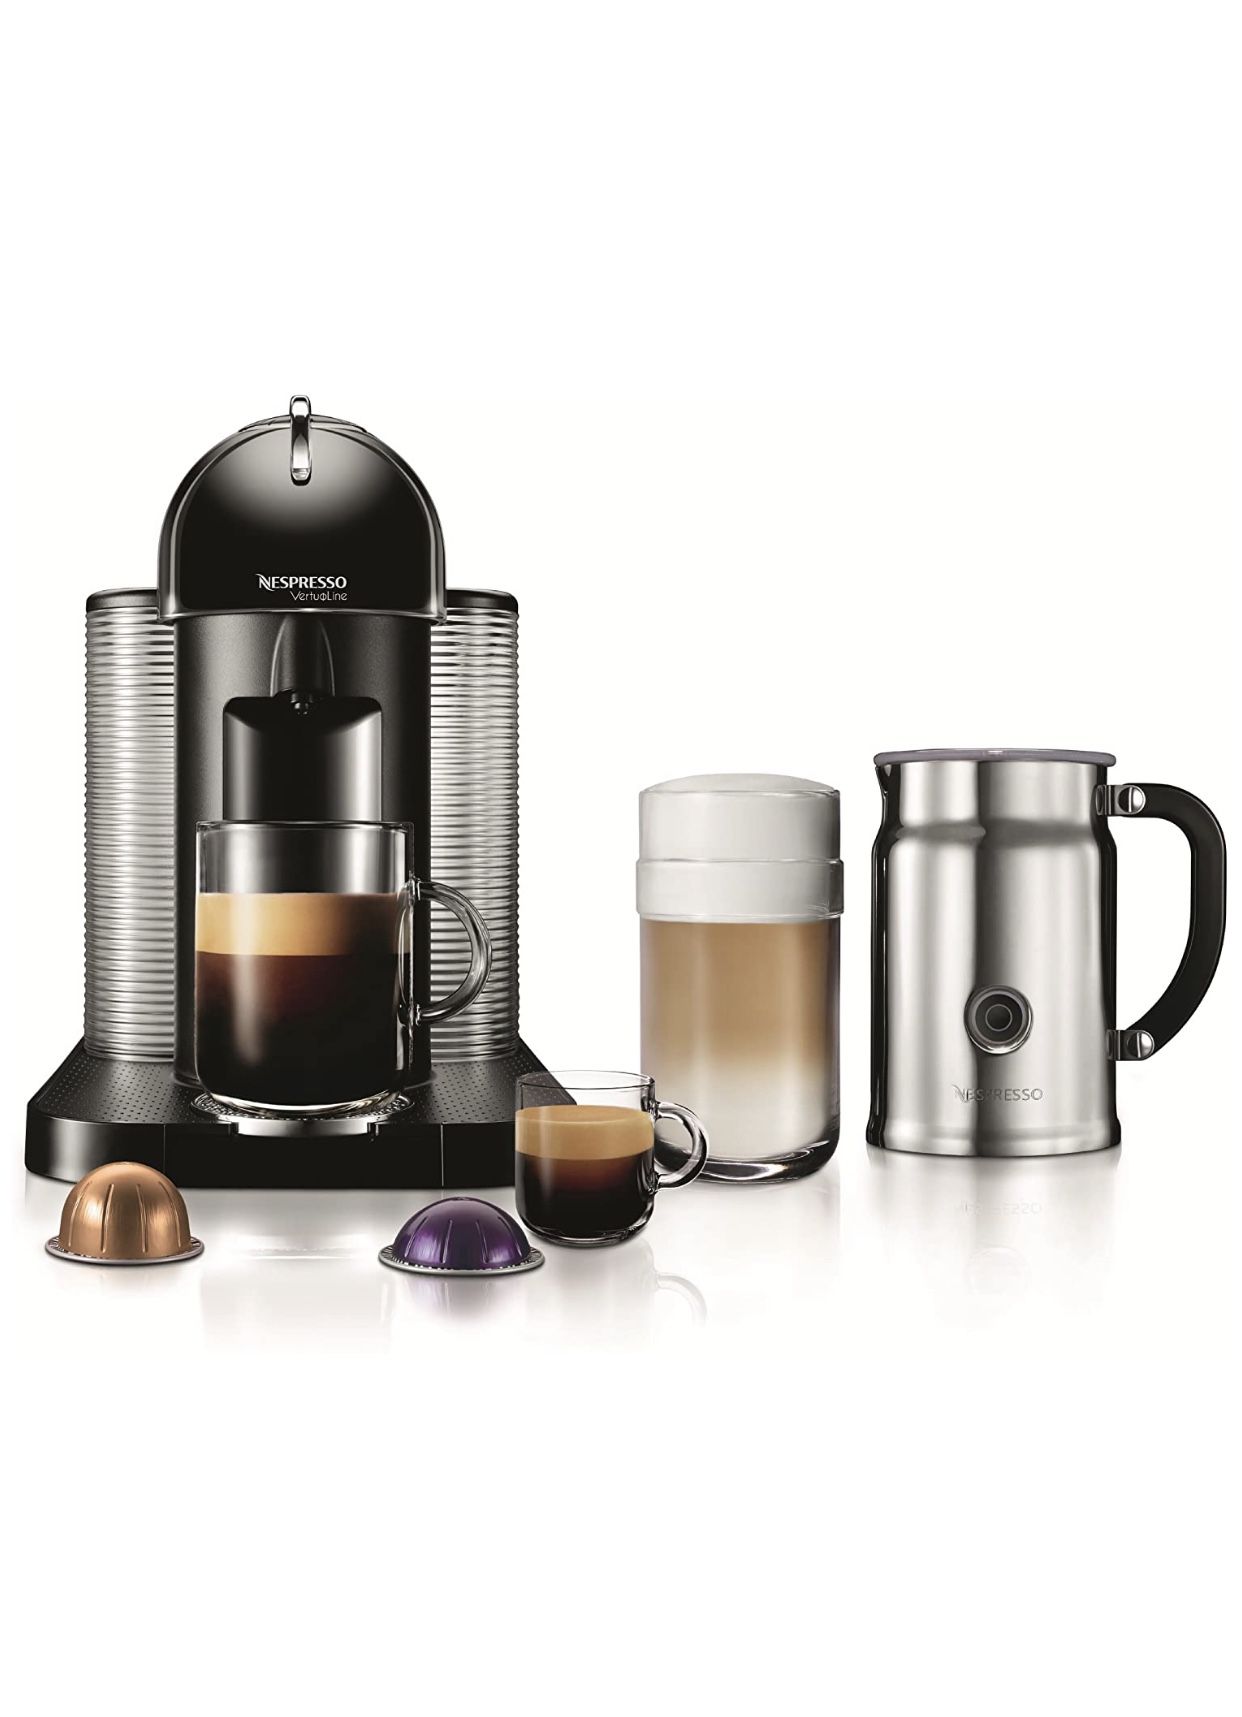 Nespresso VertuoLine with Milk Frother and Storage Stand